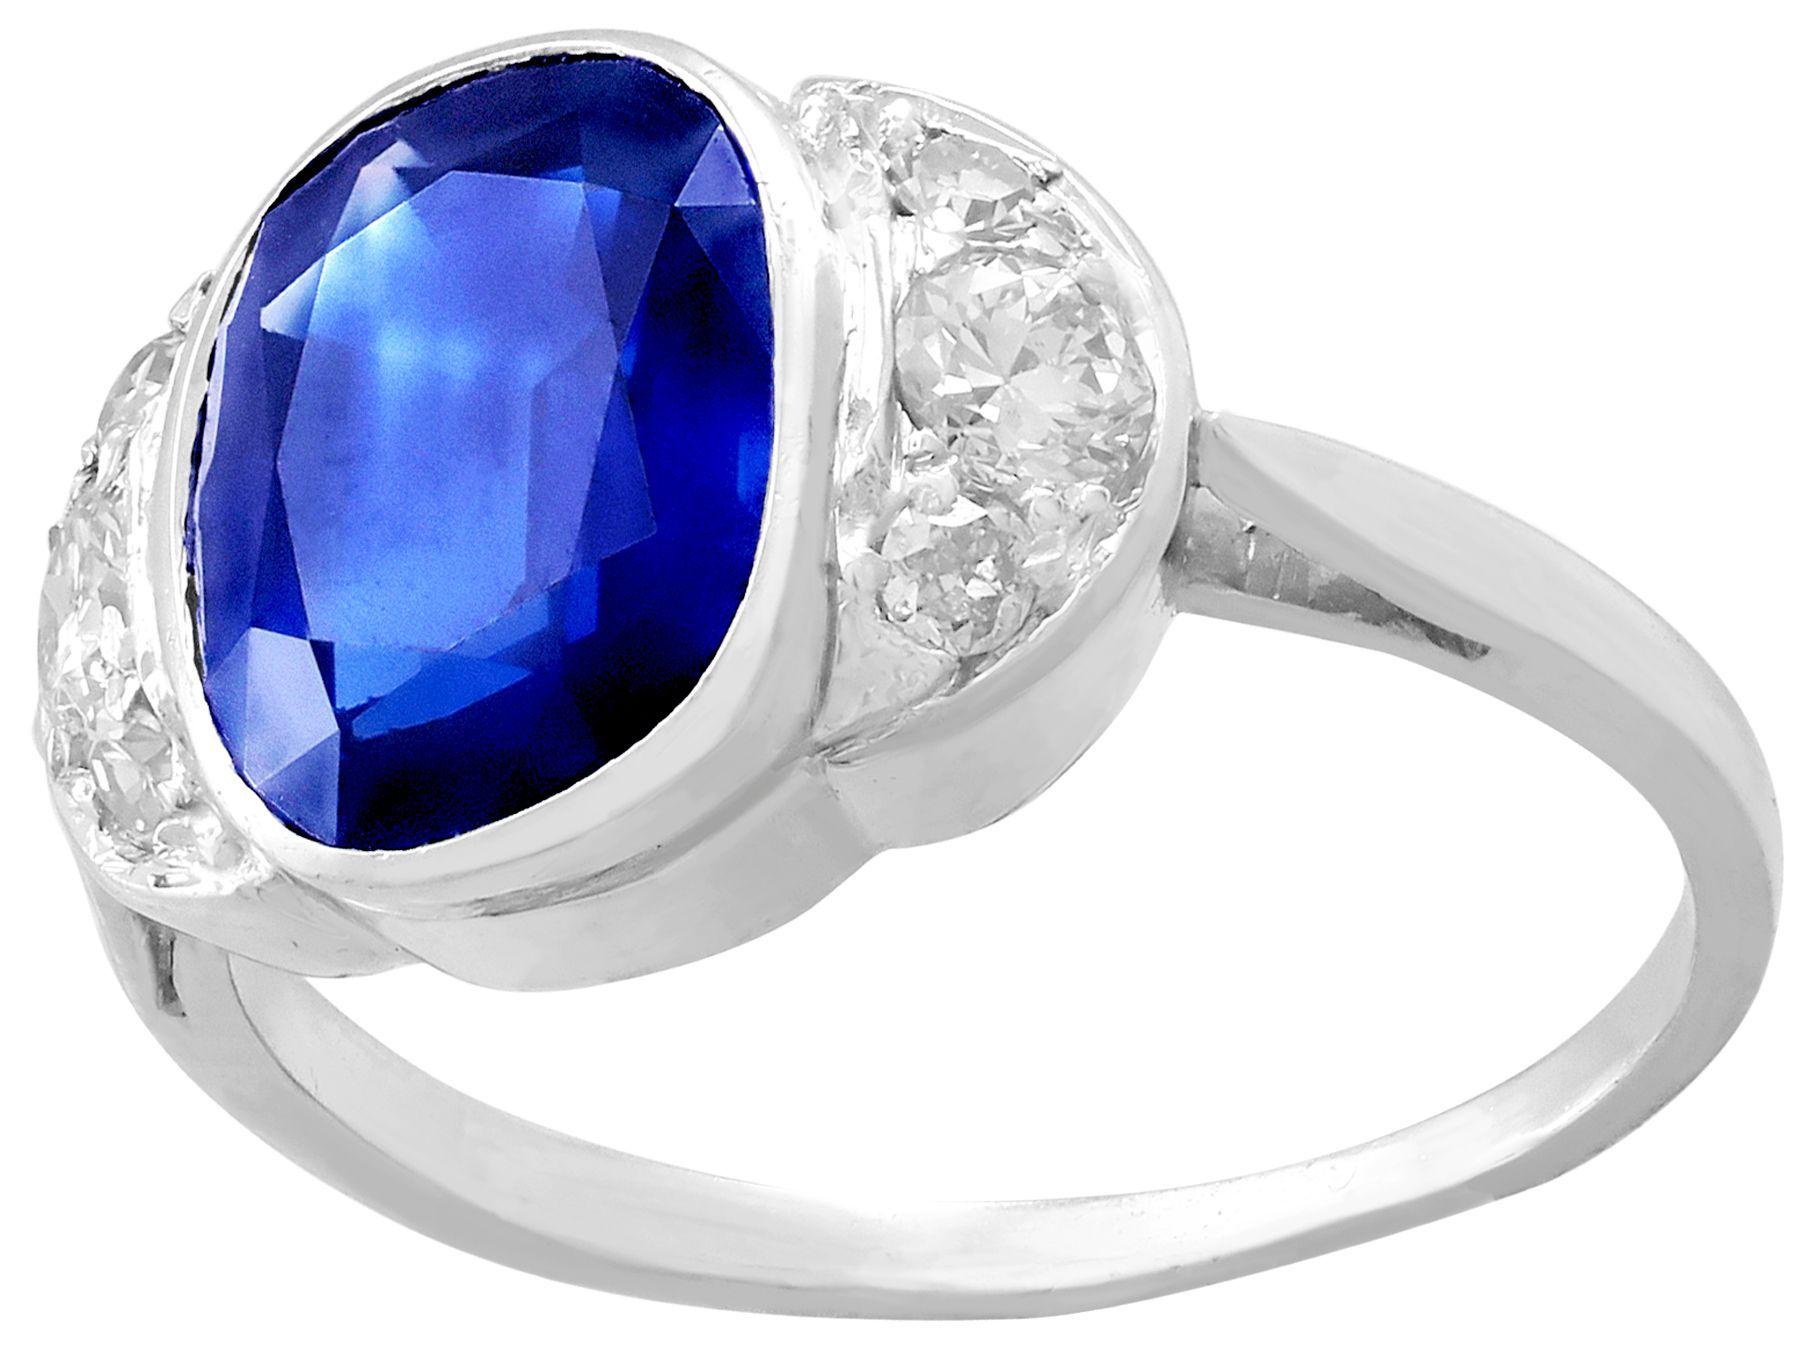 Cushion Cut Certified 3.75 Carat Sapphire and Diamond White Gold Cocktail Ring, Circa 1930 For Sale